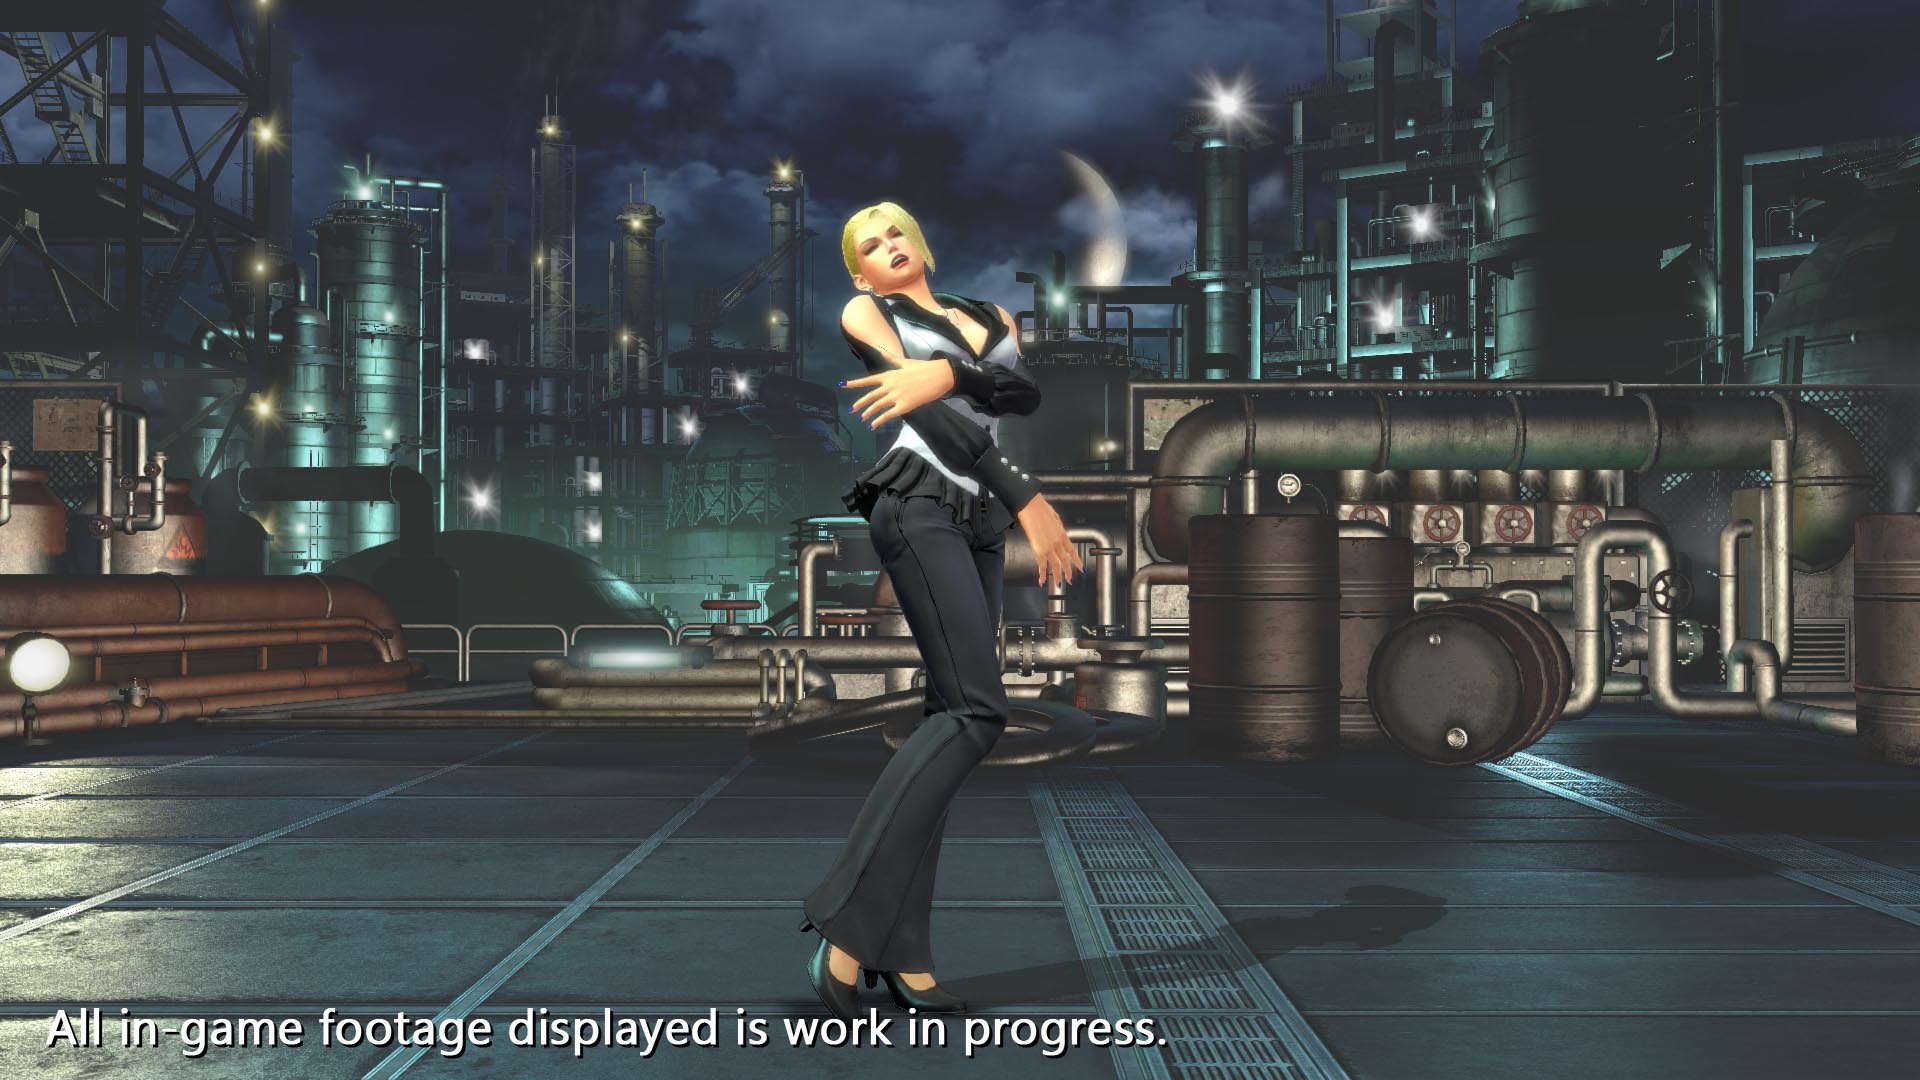 Ps4 Exclusive The King Of Fighters Xiv Gets New 1080p Gameplay